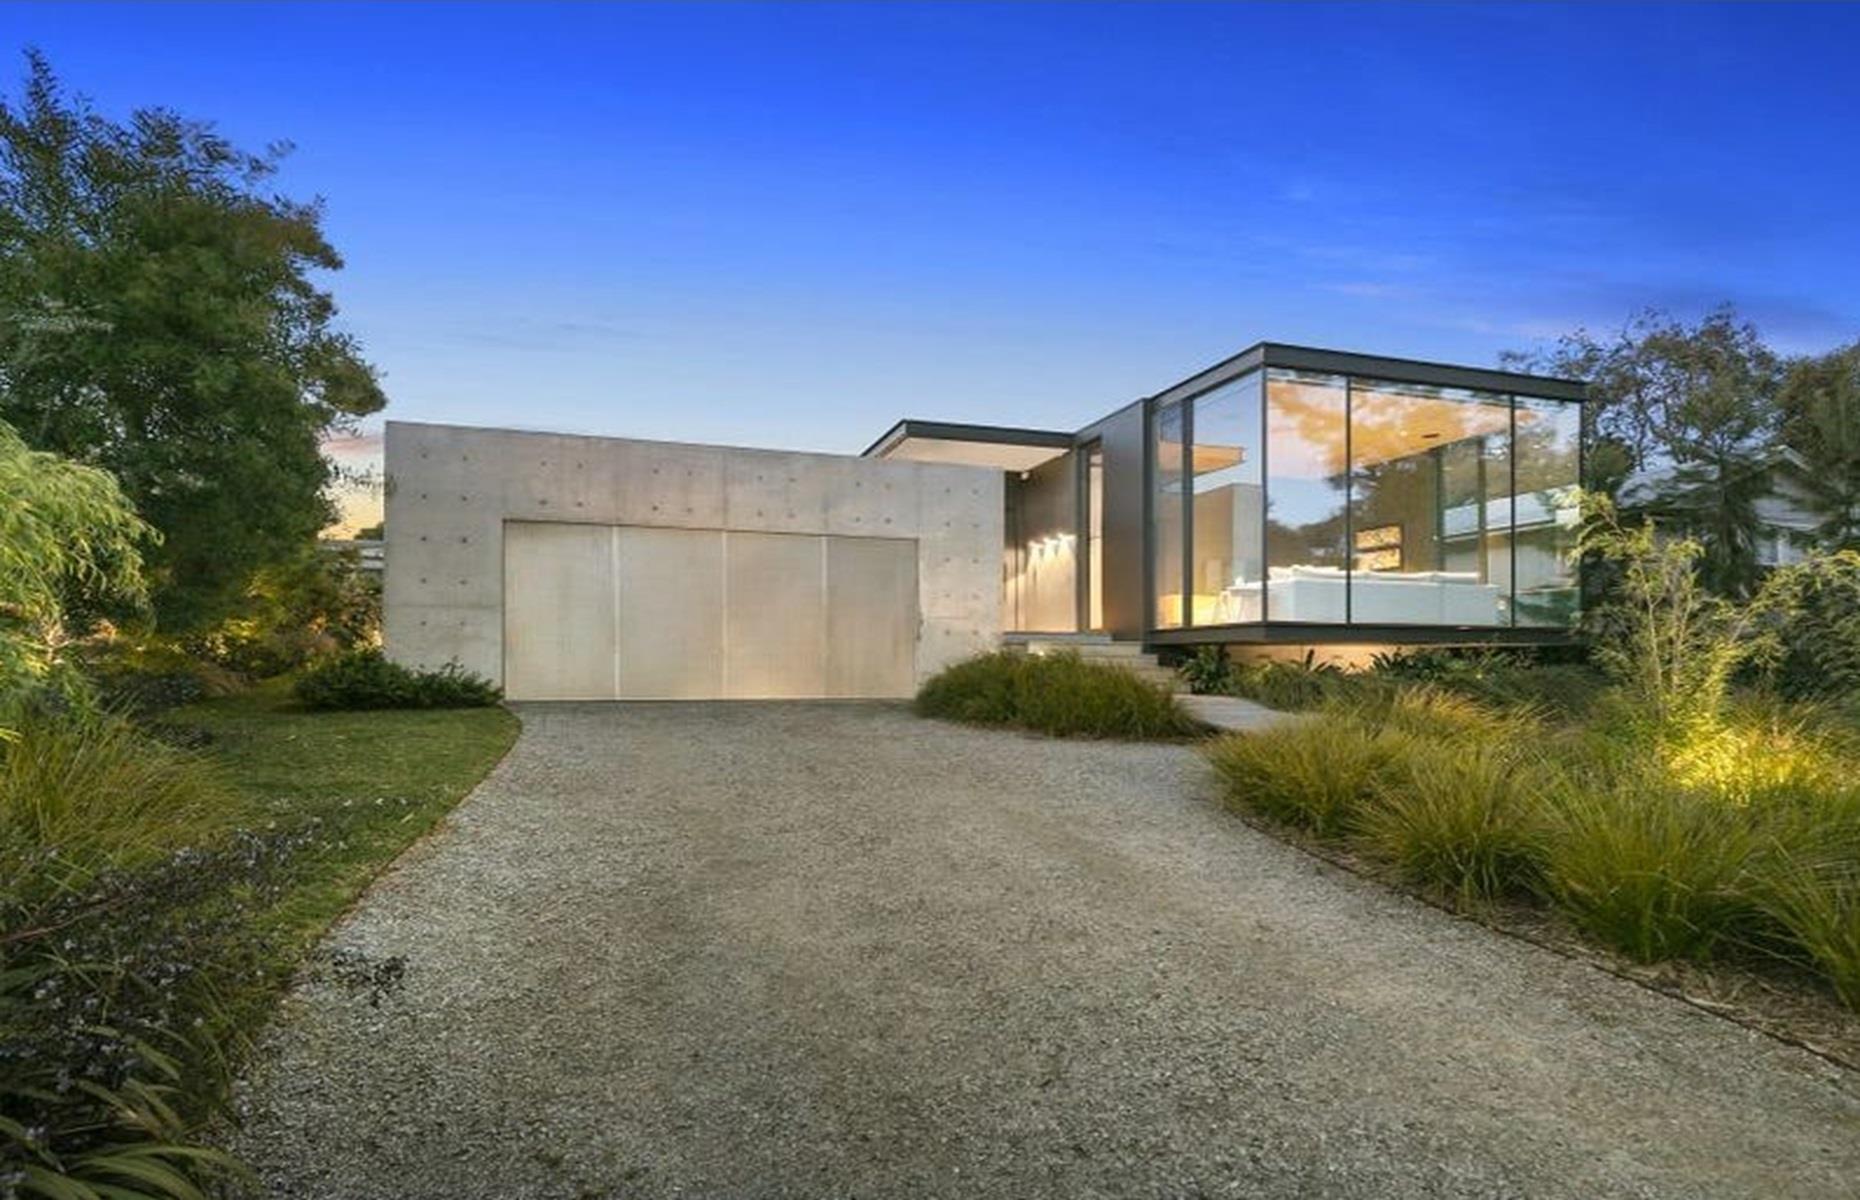 <p>Nestled on the coast in Anglesea, Victoria, this <a href="https://www.loveproperty.com/gallerylist/90827/australias-mega-mansions-will-blow-your-mind">impressive Australian home</a> is moments from the iconic Great Ocean Road. Yet it is its stunning design that makes this house so enticing.</p>